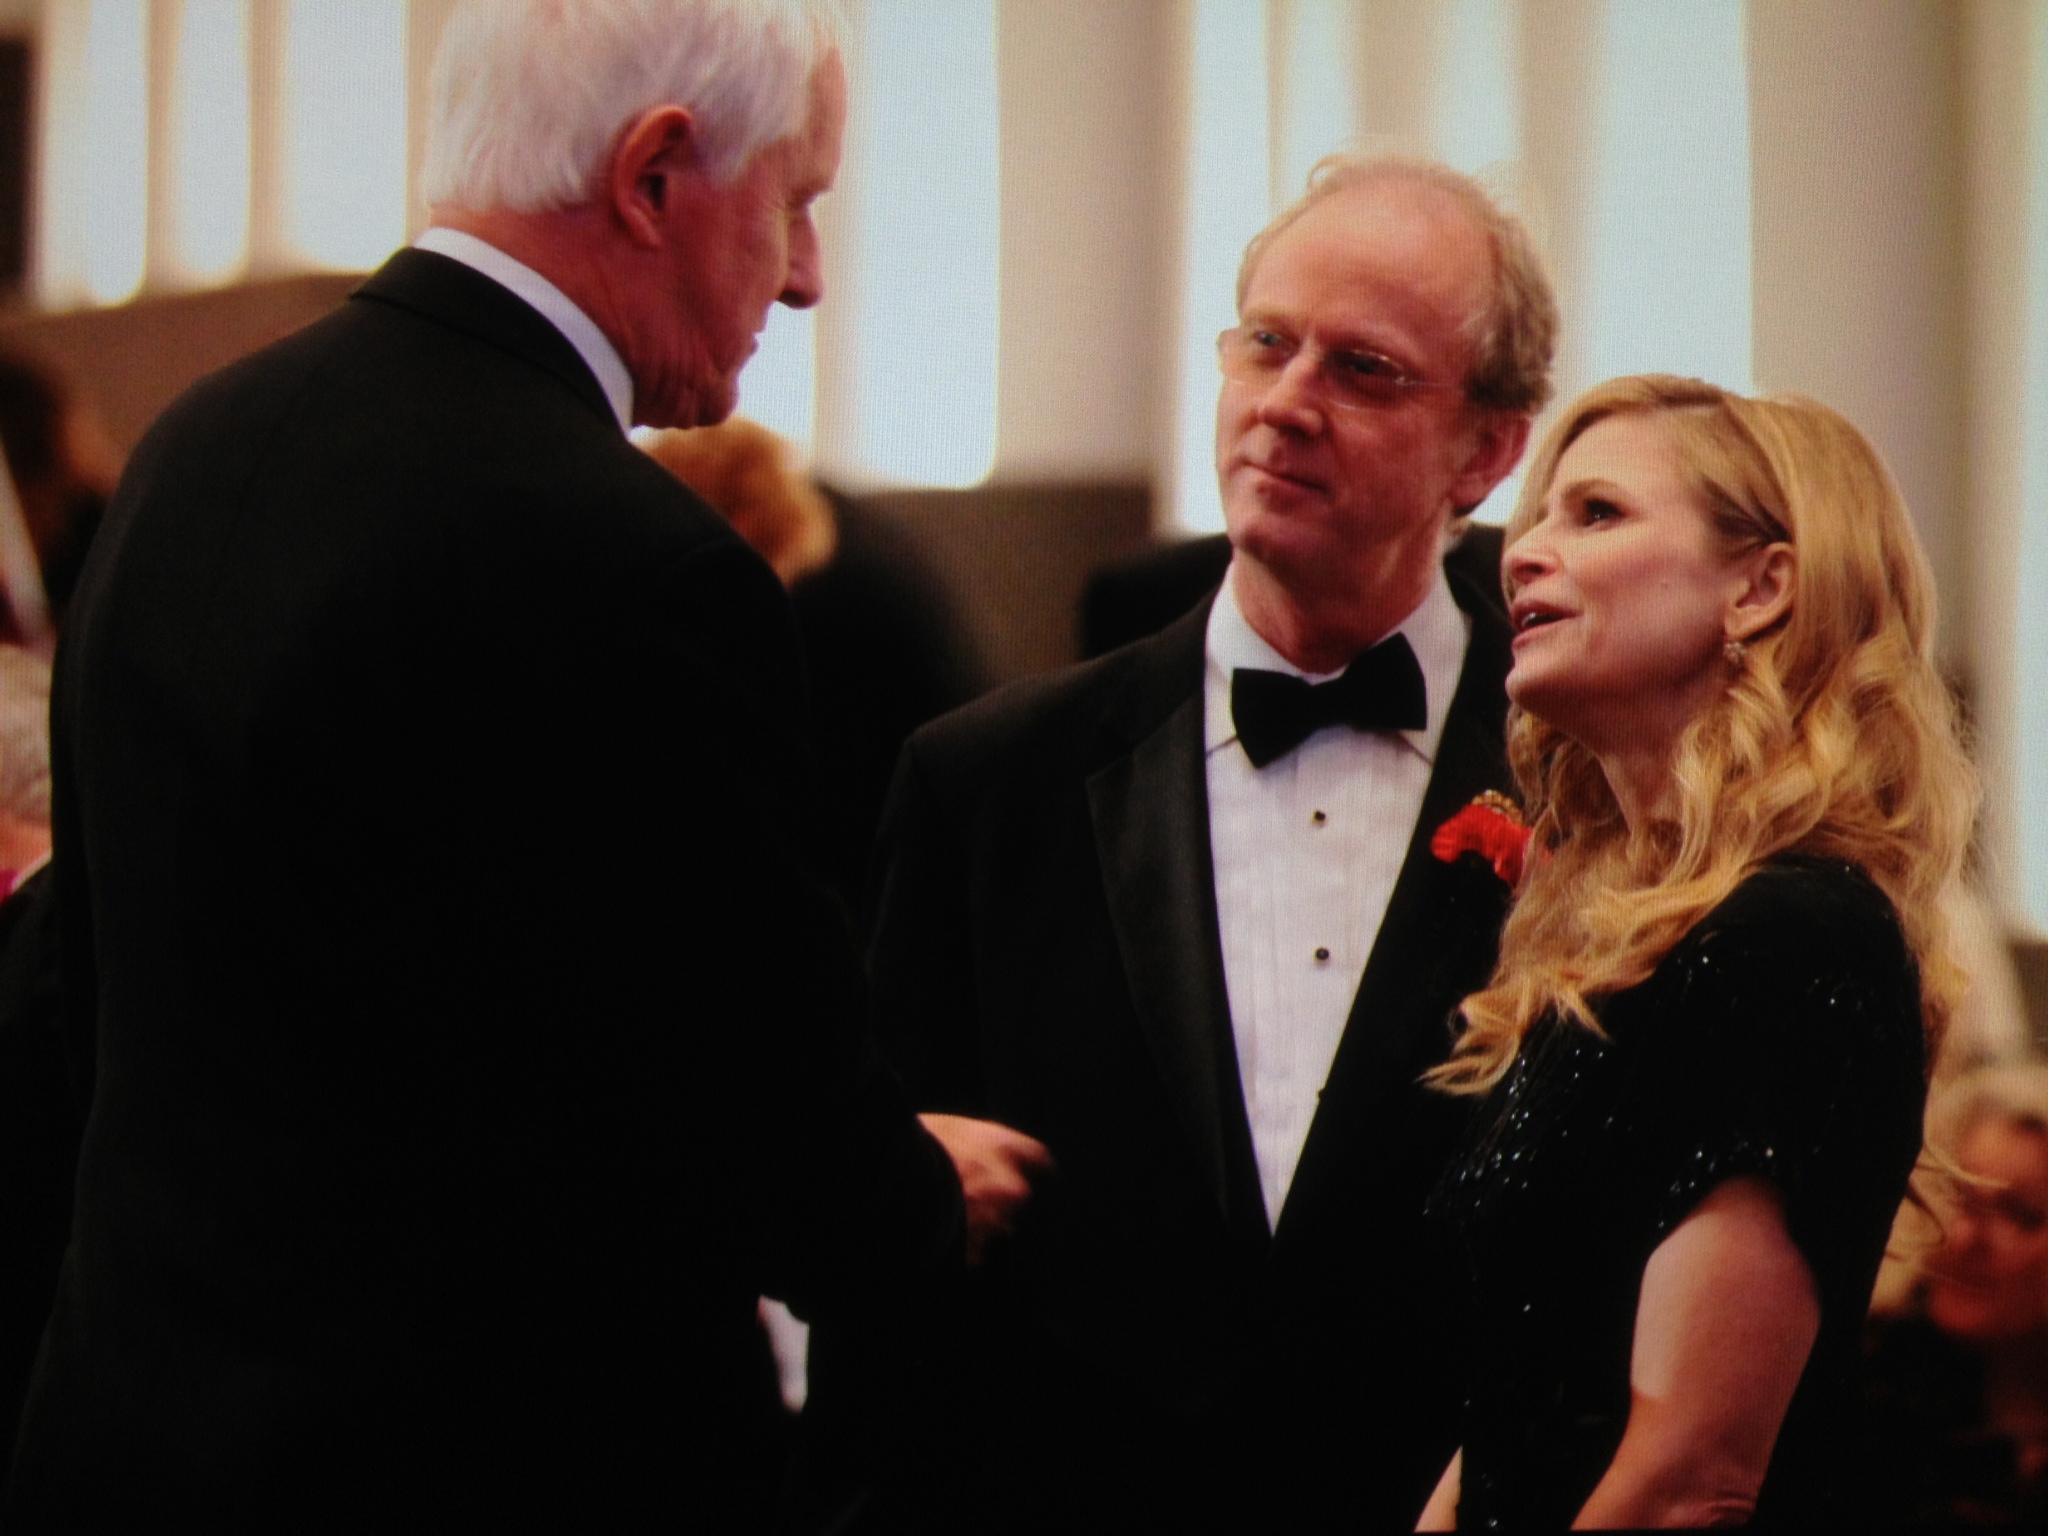 Director of Photography David J Frederick and Actress and Lifetime Achievement Award recipient Kyra Sedgwick share a moment with Steadicam Inventor Garrett Brown at the 2012 Society of Camera Operators Lifetime Achievement Awards